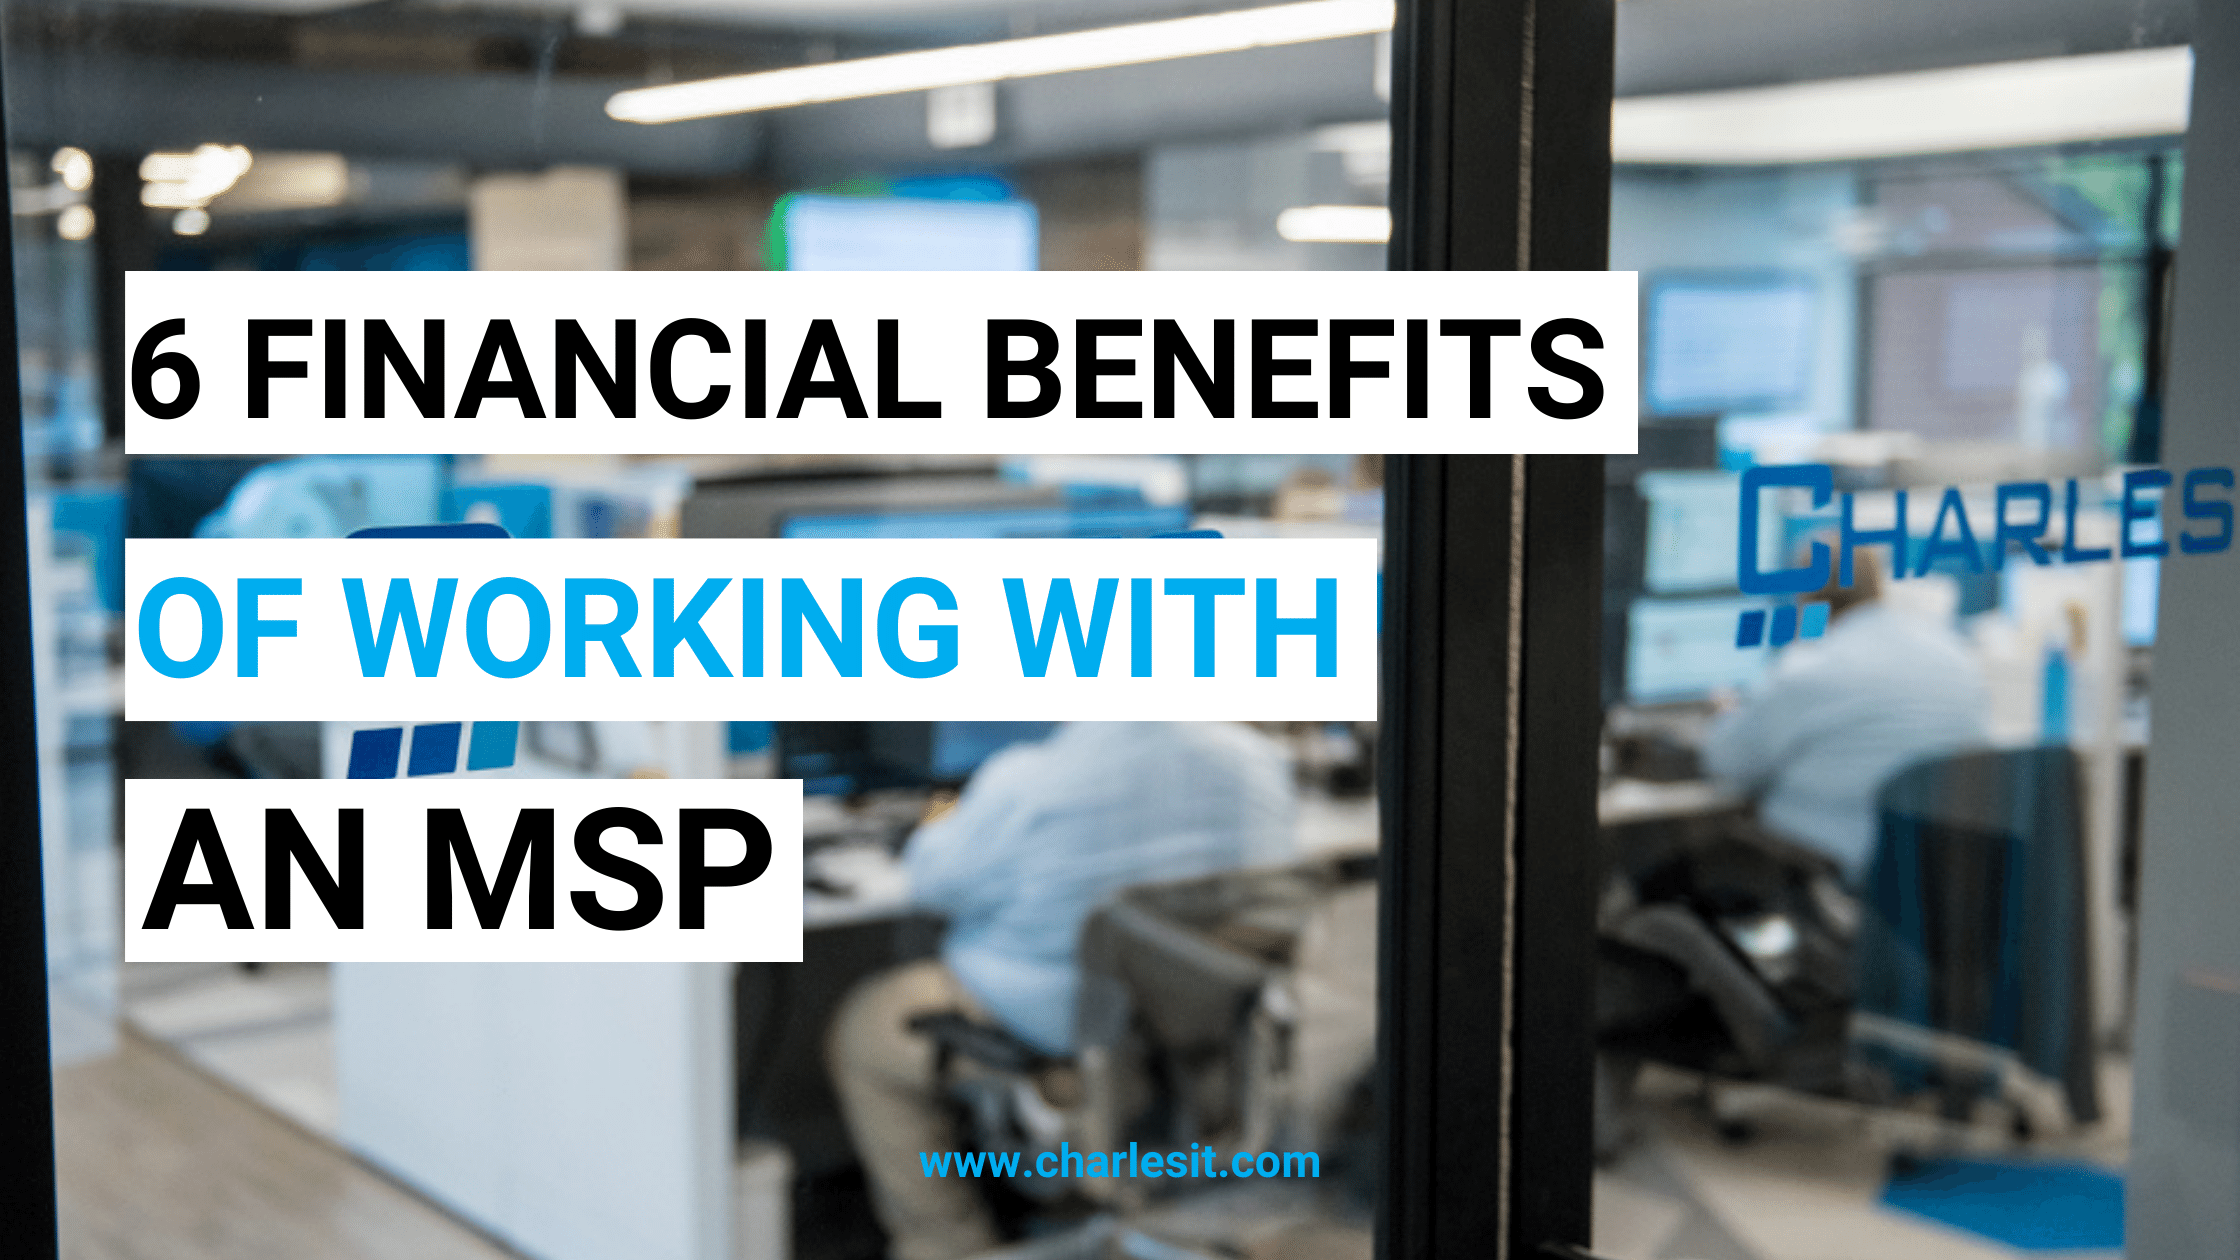 6 Financial Benefits of Working with a MSP